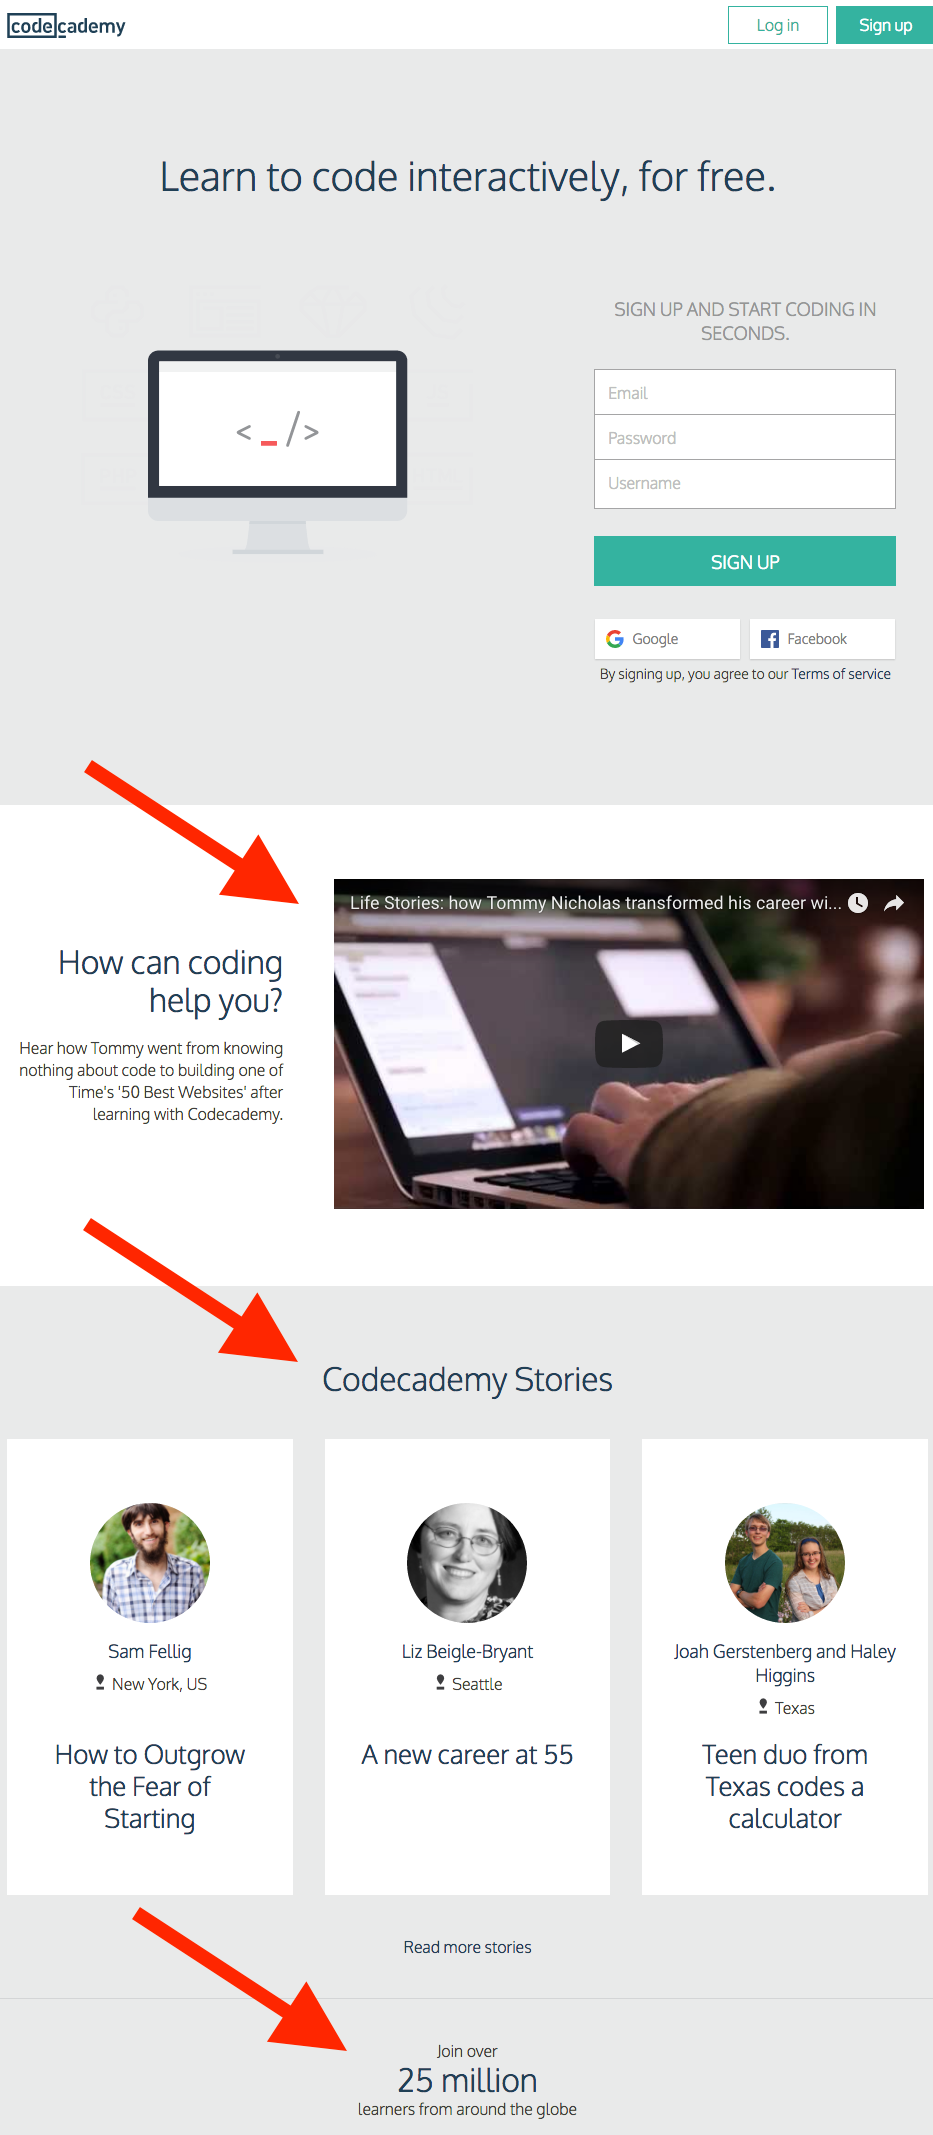 codecademy-social-proof-homepage.png